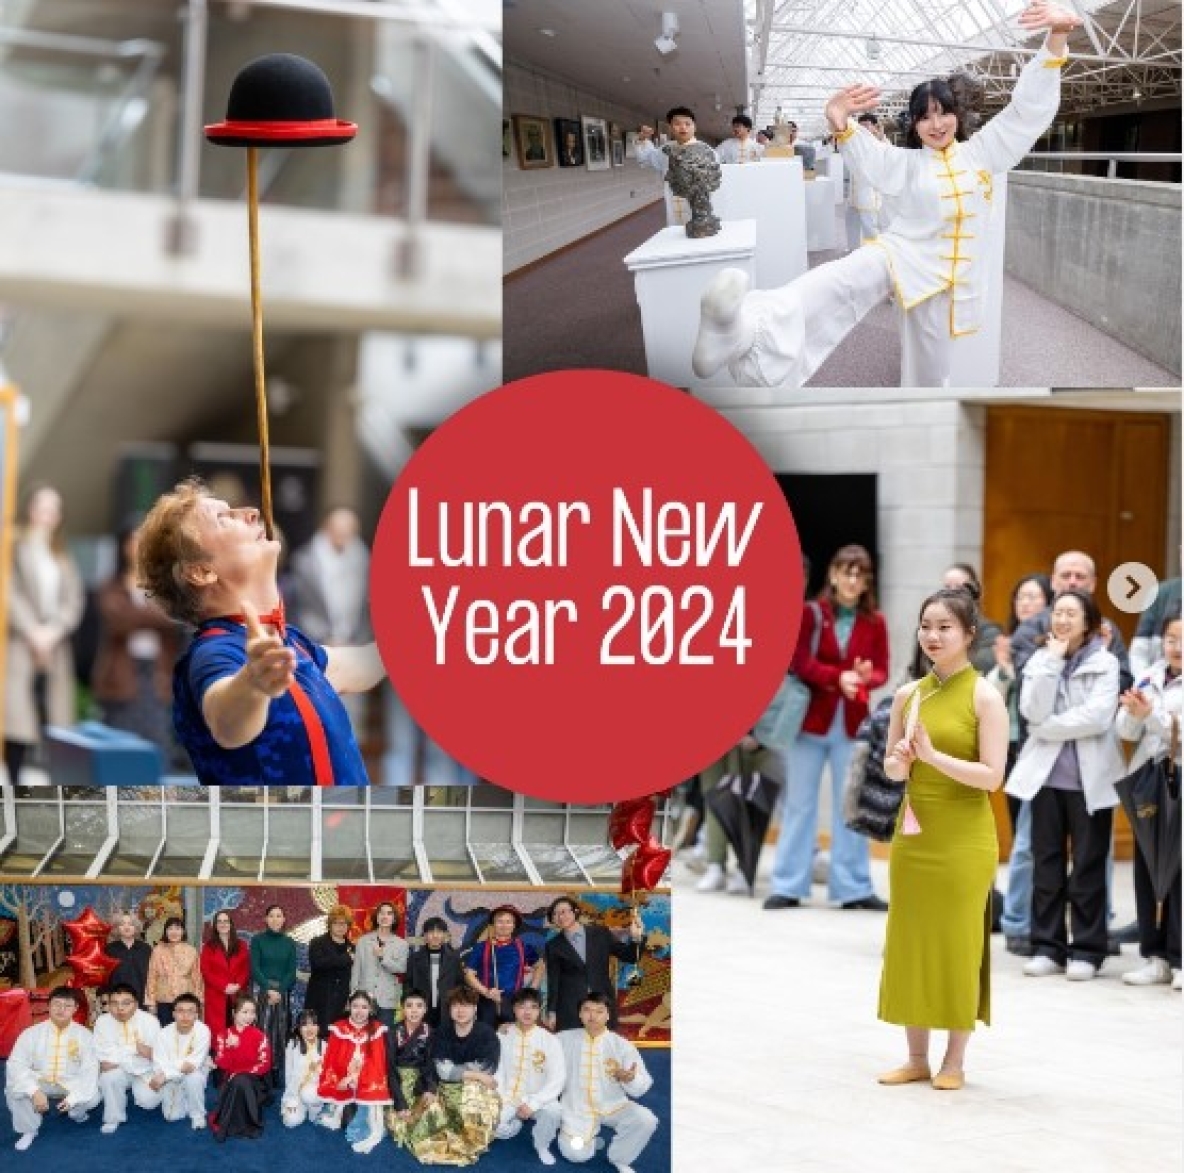 A collection of pictures of students celebrating Lunar new year